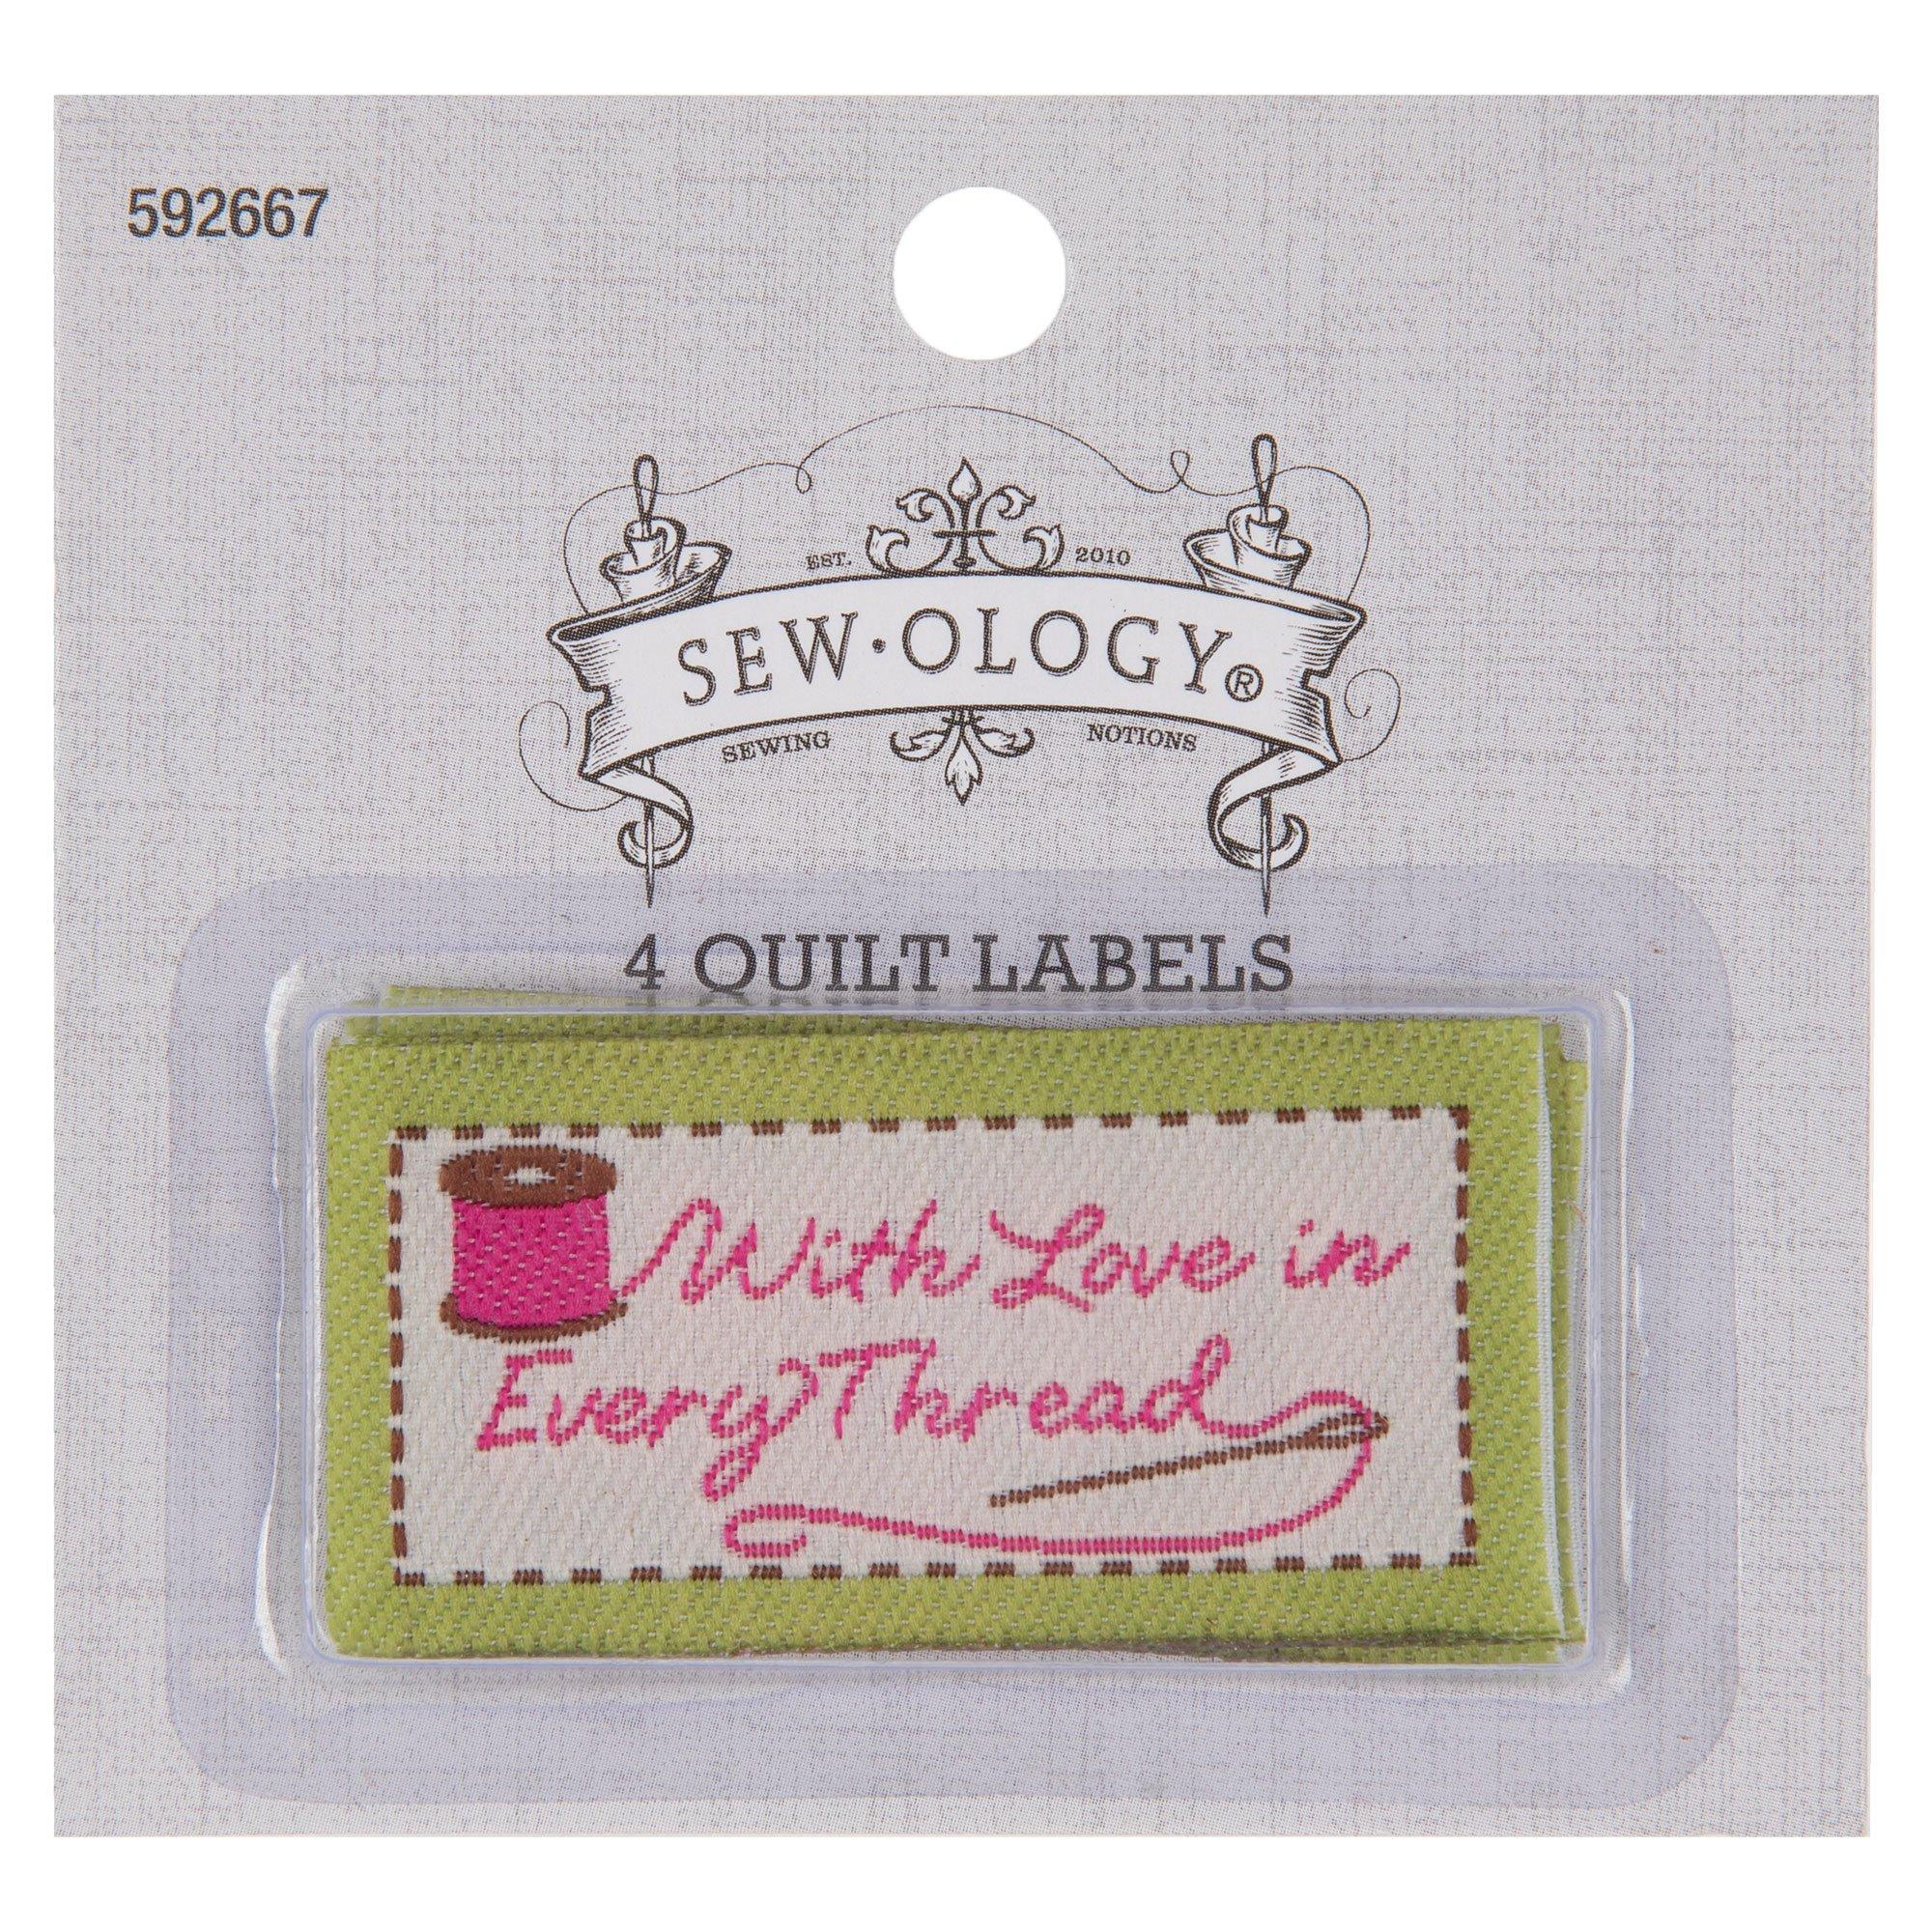 With Love In Every Thread Quilt Labels, Hobby Lobby